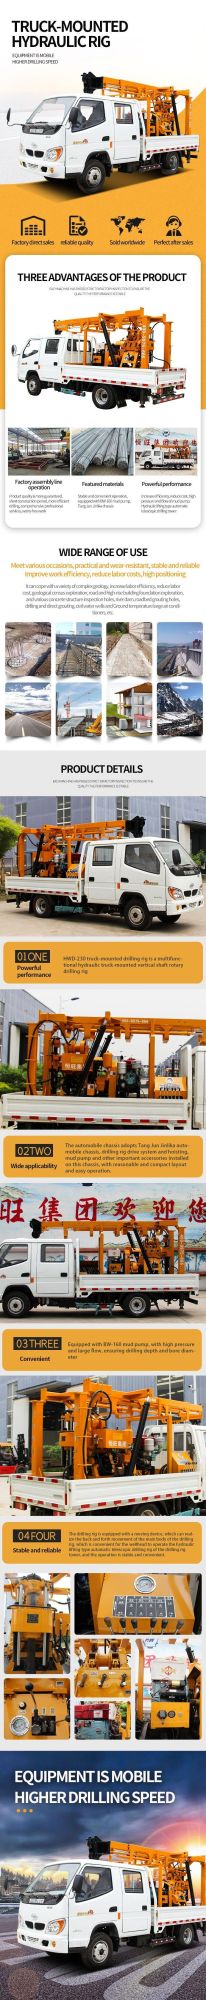 Portable Water Well Hydraulic Core Drilling Rig for Sale